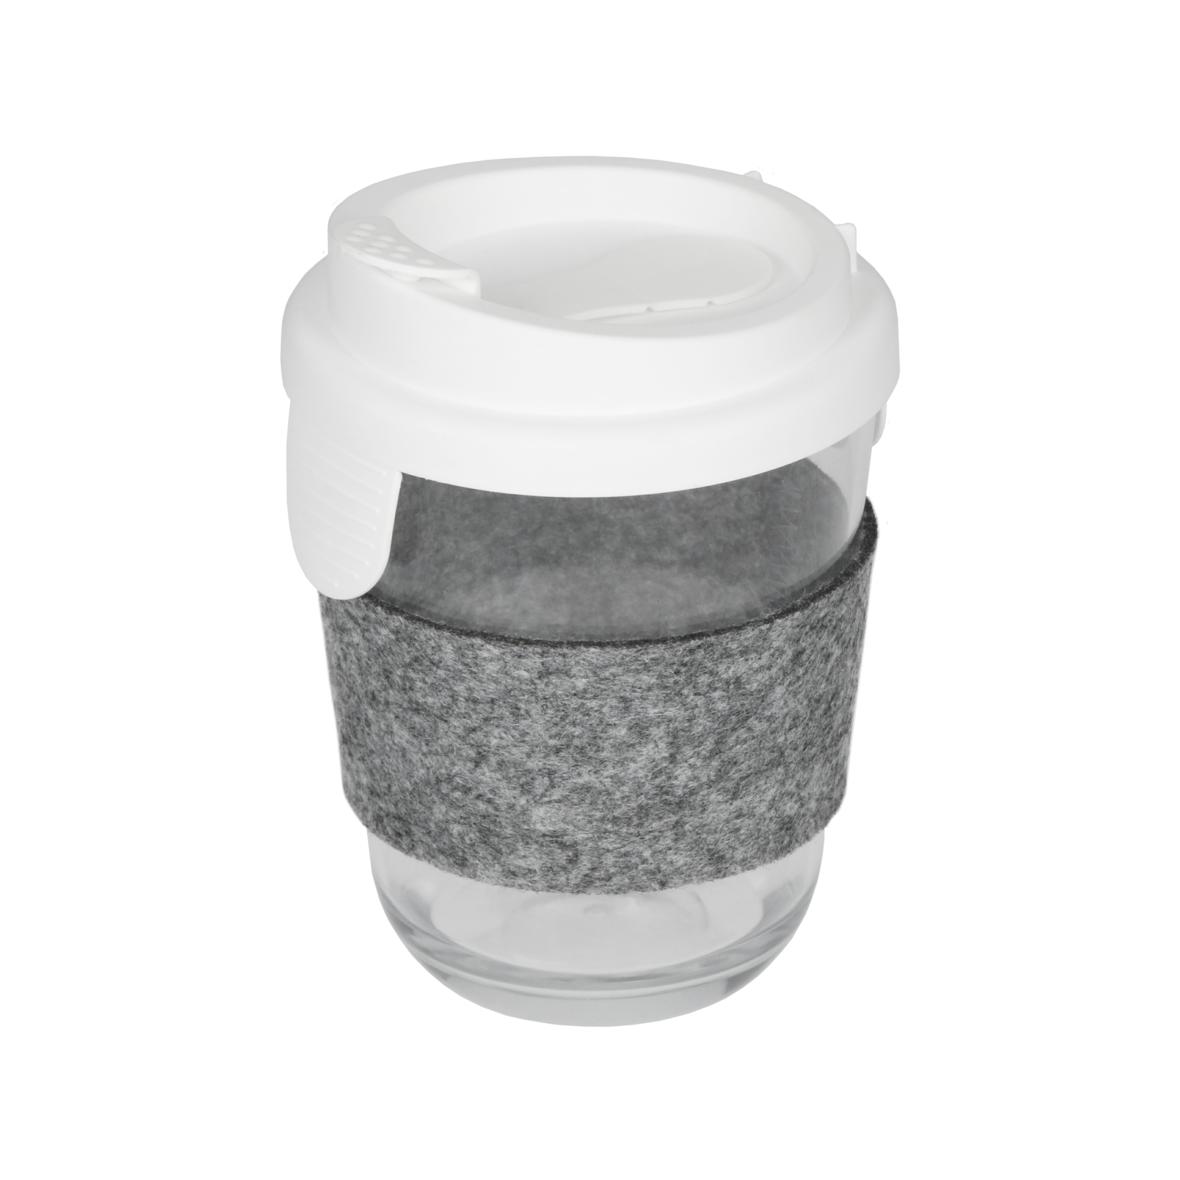 A coffee cup made of shatterproof Tritan material, complete with a lid and sleeve - Sevenoaks